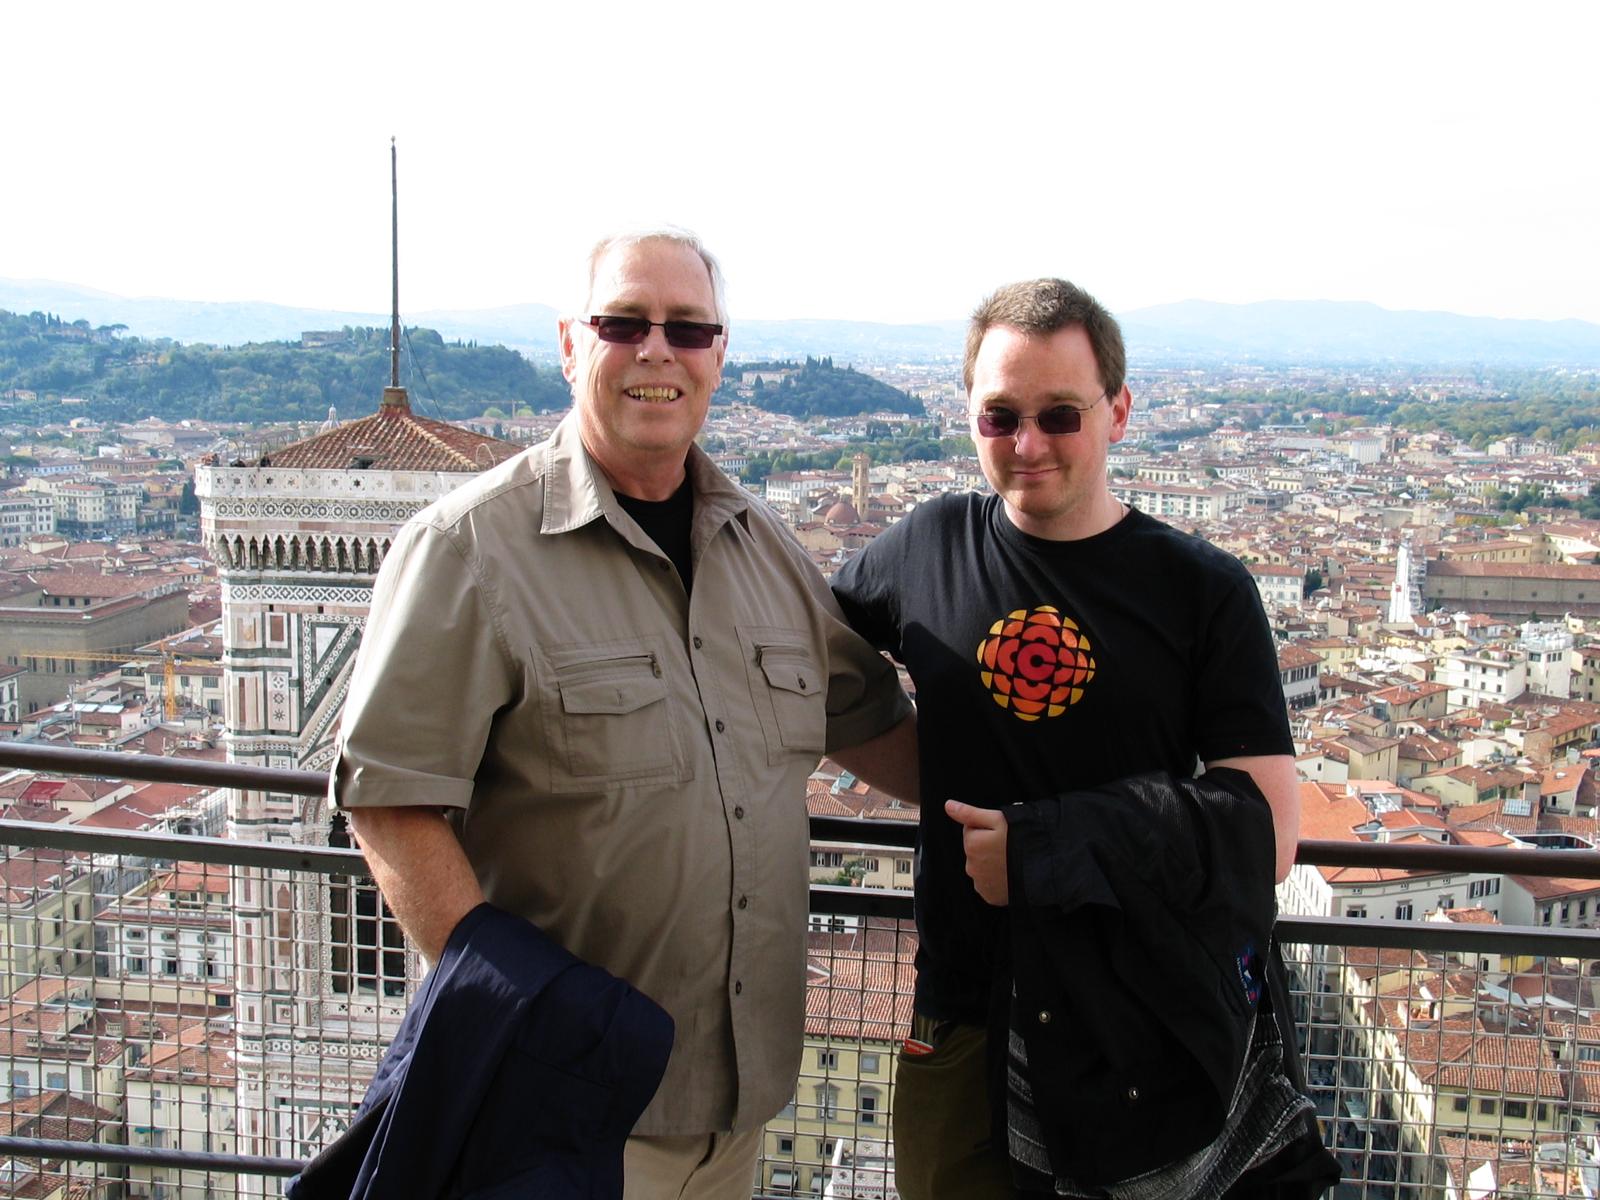 My dad and I on top of the Duomo